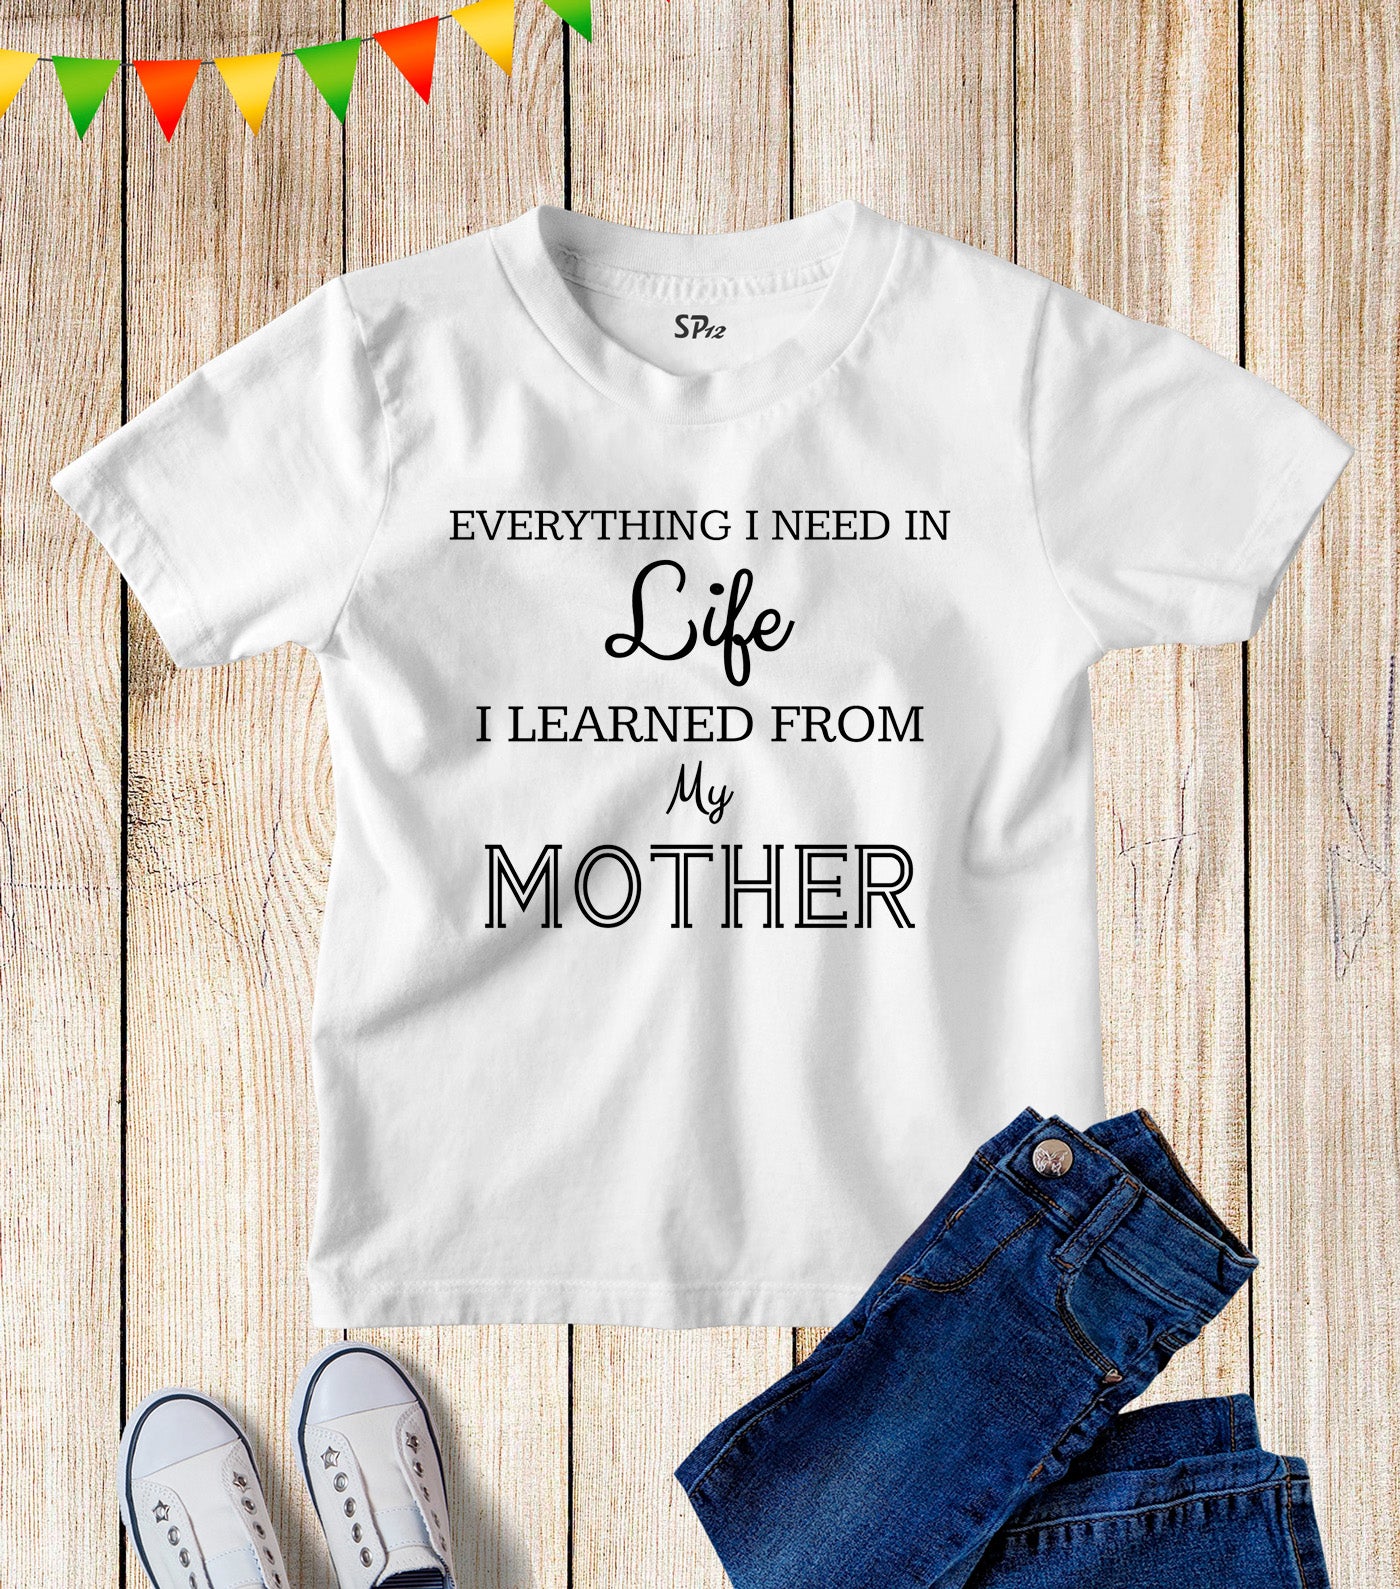 Everything I Need To Know I Learned from My Mother Kids T Shirt